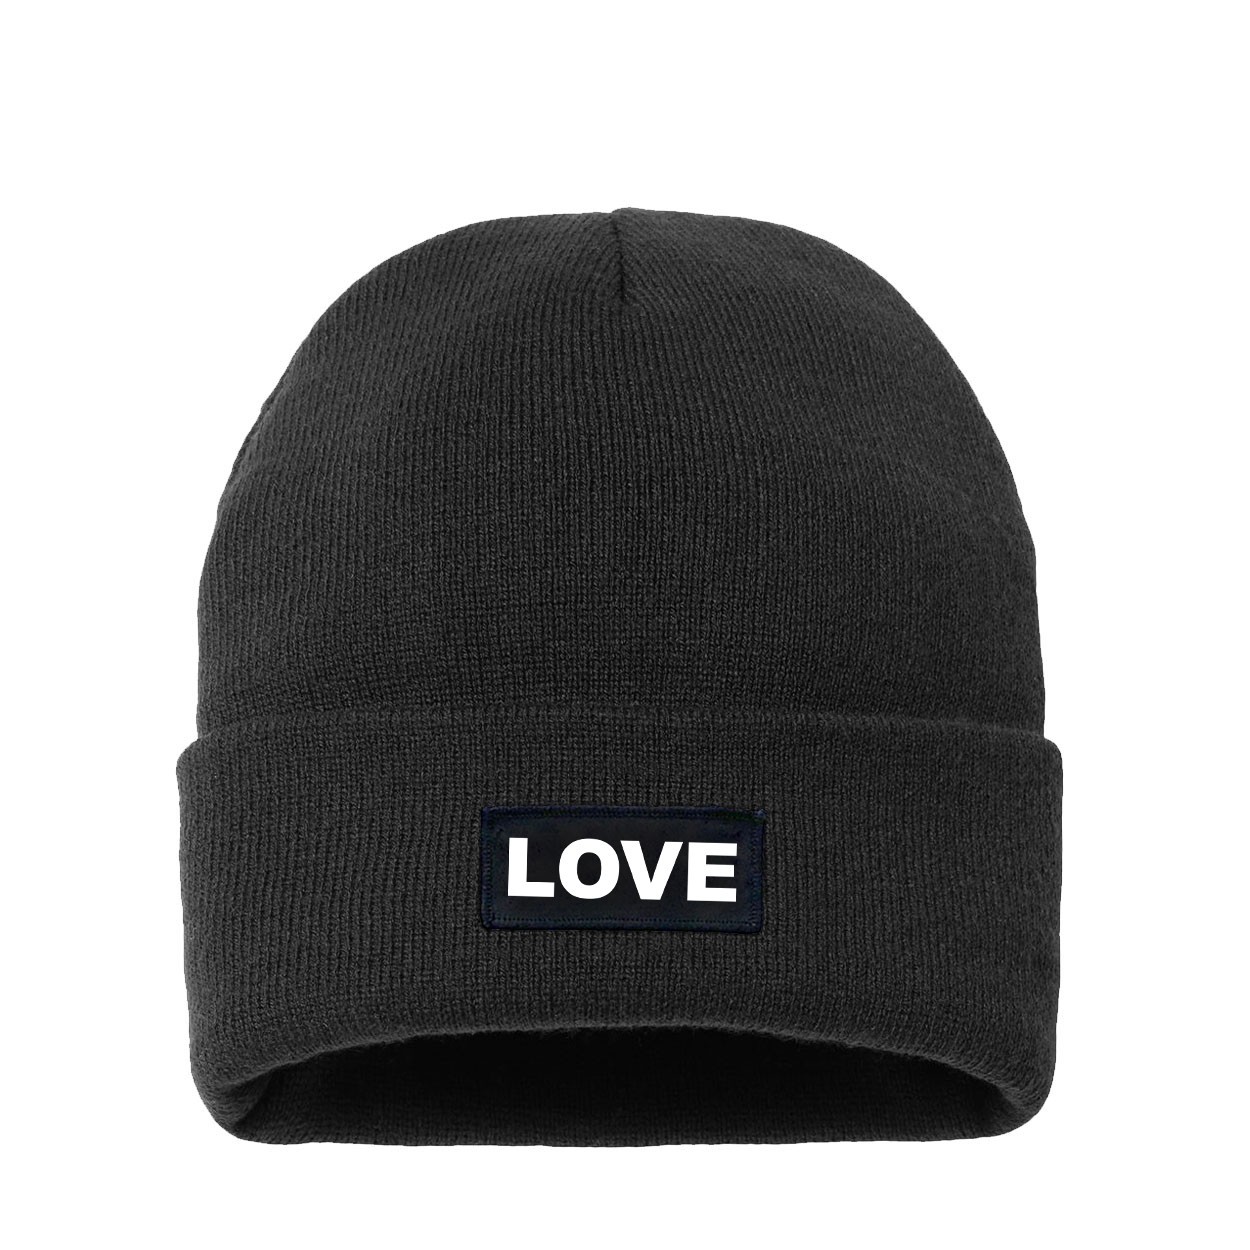 Love Brand Logo Night Out Woven Patch Night Out Sherpa Lined Cuffed Beanie Black